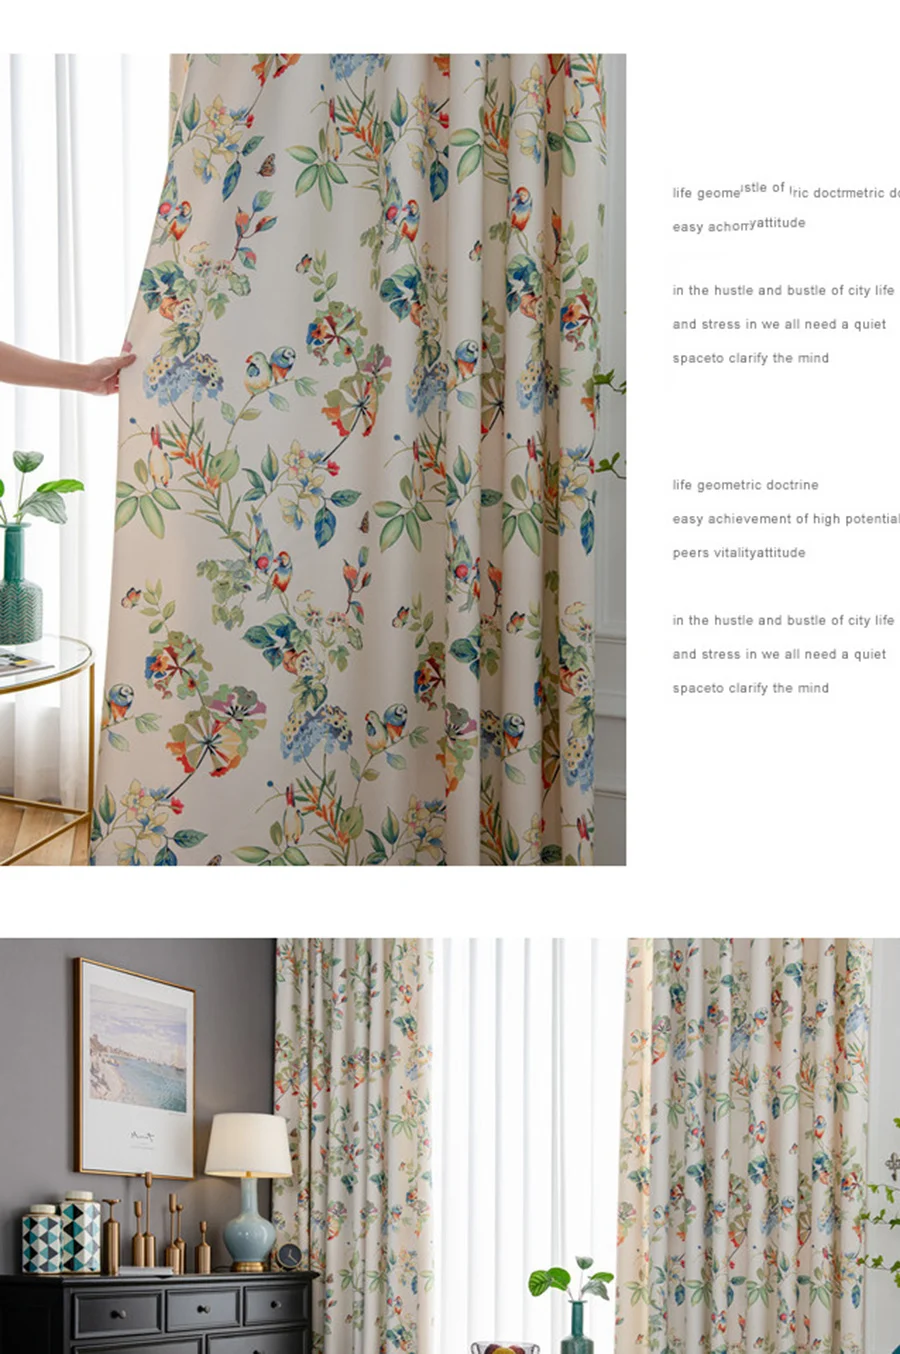 Flower Birds Semi-Shading Silk Satin Fabrics Bedroom Curtains American Country Pastoral Retro Blinds For Living Room Decoration